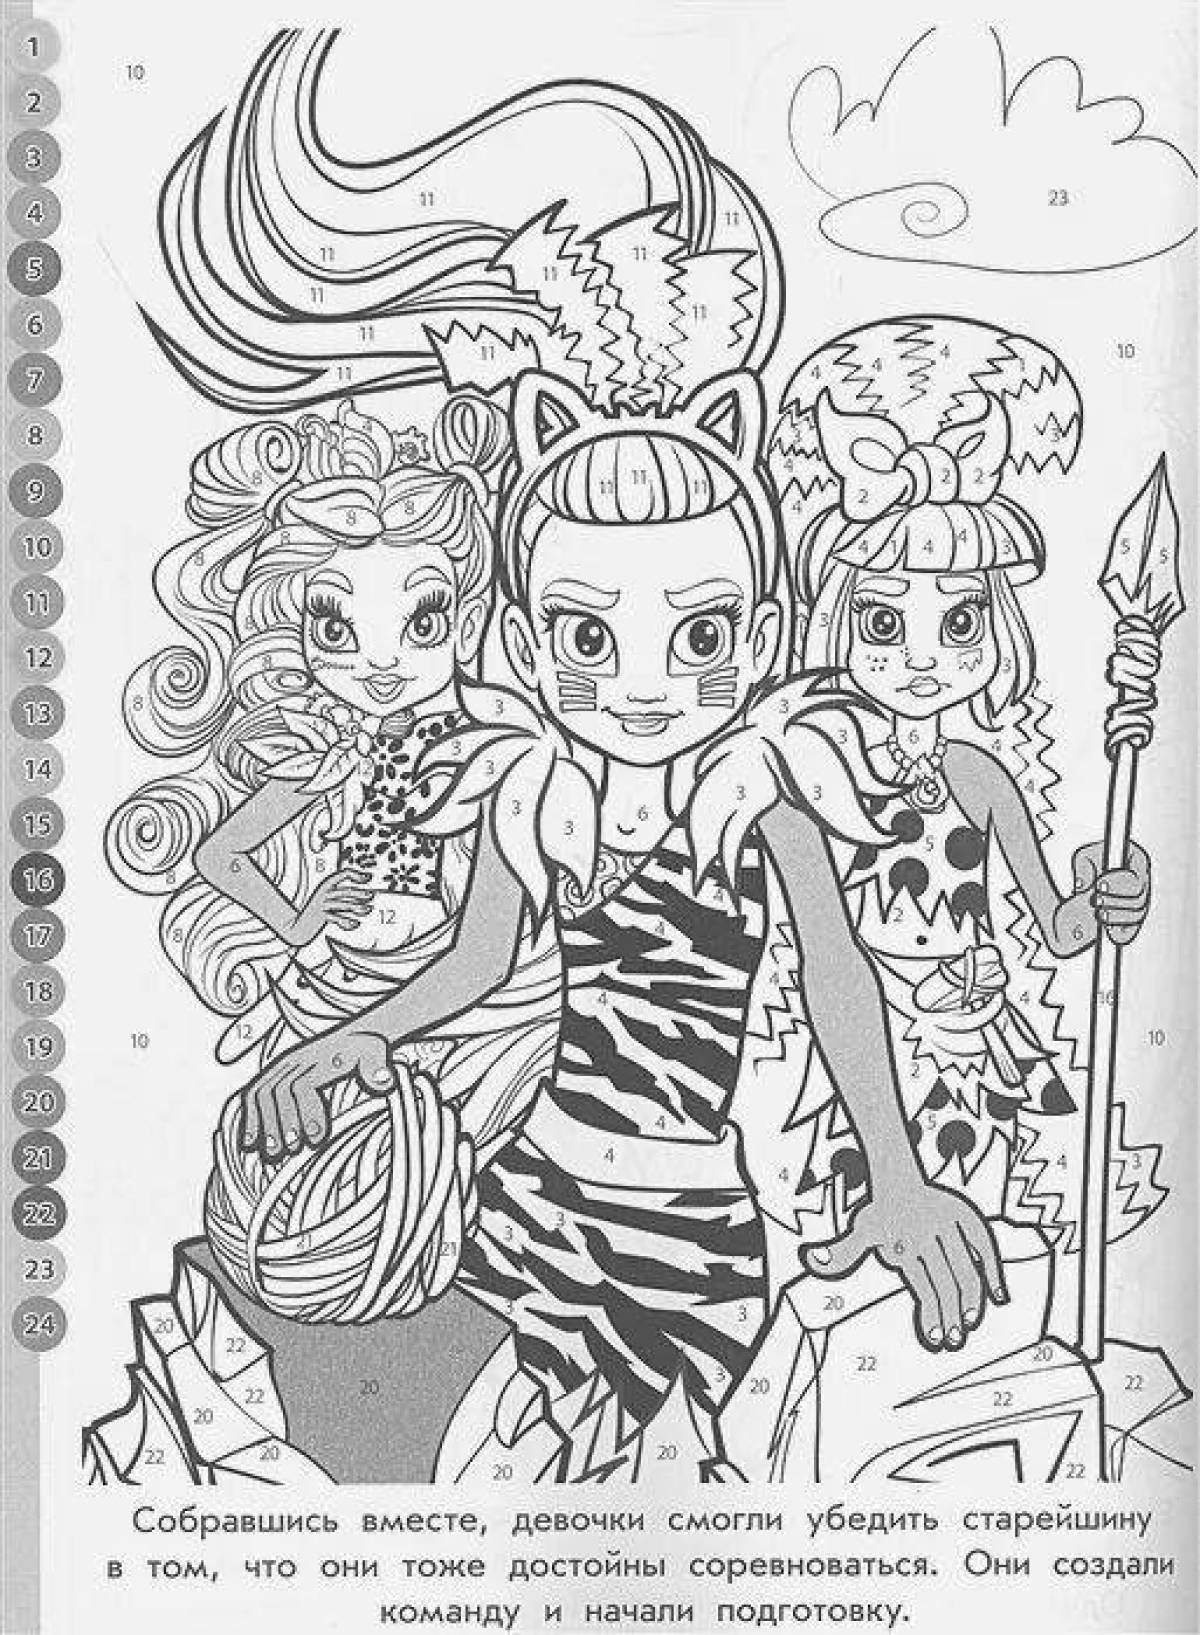 Charming cave club coloring book